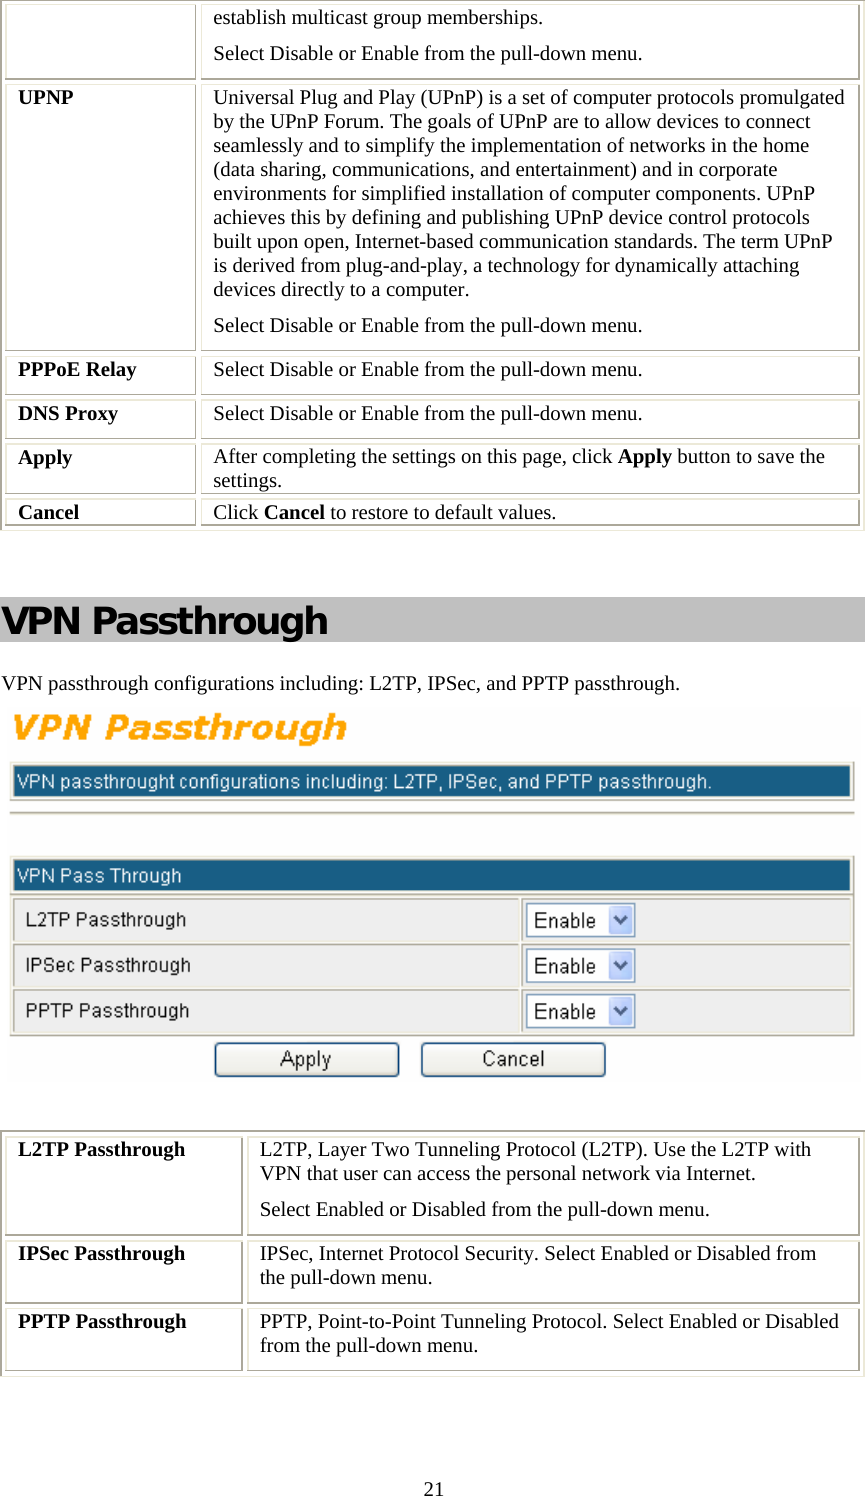   21establish multicast group memberships. Select Disable or Enable from the pull-down menu. UPNP  Universal Plug and Play (UPnP) is a set of computer protocols promulgated by the UPnP Forum. The goals of UPnP are to allow devices to connect seamlessly and to simplify the implementation of networks in the home (data sharing, communications, and entertainment) and in corporate environments for simplified installation of computer components. UPnP achieves this by defining and publishing UPnP device control protocols built upon open, Internet-based communication standards. The term UPnP is derived from plug-and-play, a technology for dynamically attaching devices directly to a computer. Select Disable or Enable from the pull-down menu. PPPoE Relay  Select Disable or Enable from the pull-down menu. DNS Proxy  Select Disable or Enable from the pull-down menu. Apply  After completing the settings on this page, click Apply button to save the settings. Cancel  Click Cancel to restore to default values.  VPN Passthrough VPN passthrough configurations including: L2TP, IPSec, and PPTP passthrough.   L2TP Passthrough  L2TP, Layer Two Tunneling Protocol (L2TP). Use the L2TP with VPN that user can access the personal network via Internet. Select Enabled or Disabled from the pull-down menu. IPSec Passthrough  IPSec, Internet Protocol Security. Select Enabled or Disabled from the pull-down menu. PPTP Passthrough  PPTP, Point-to-Point Tunneling Protocol. Select Enabled or Disabled from the pull-down menu. 